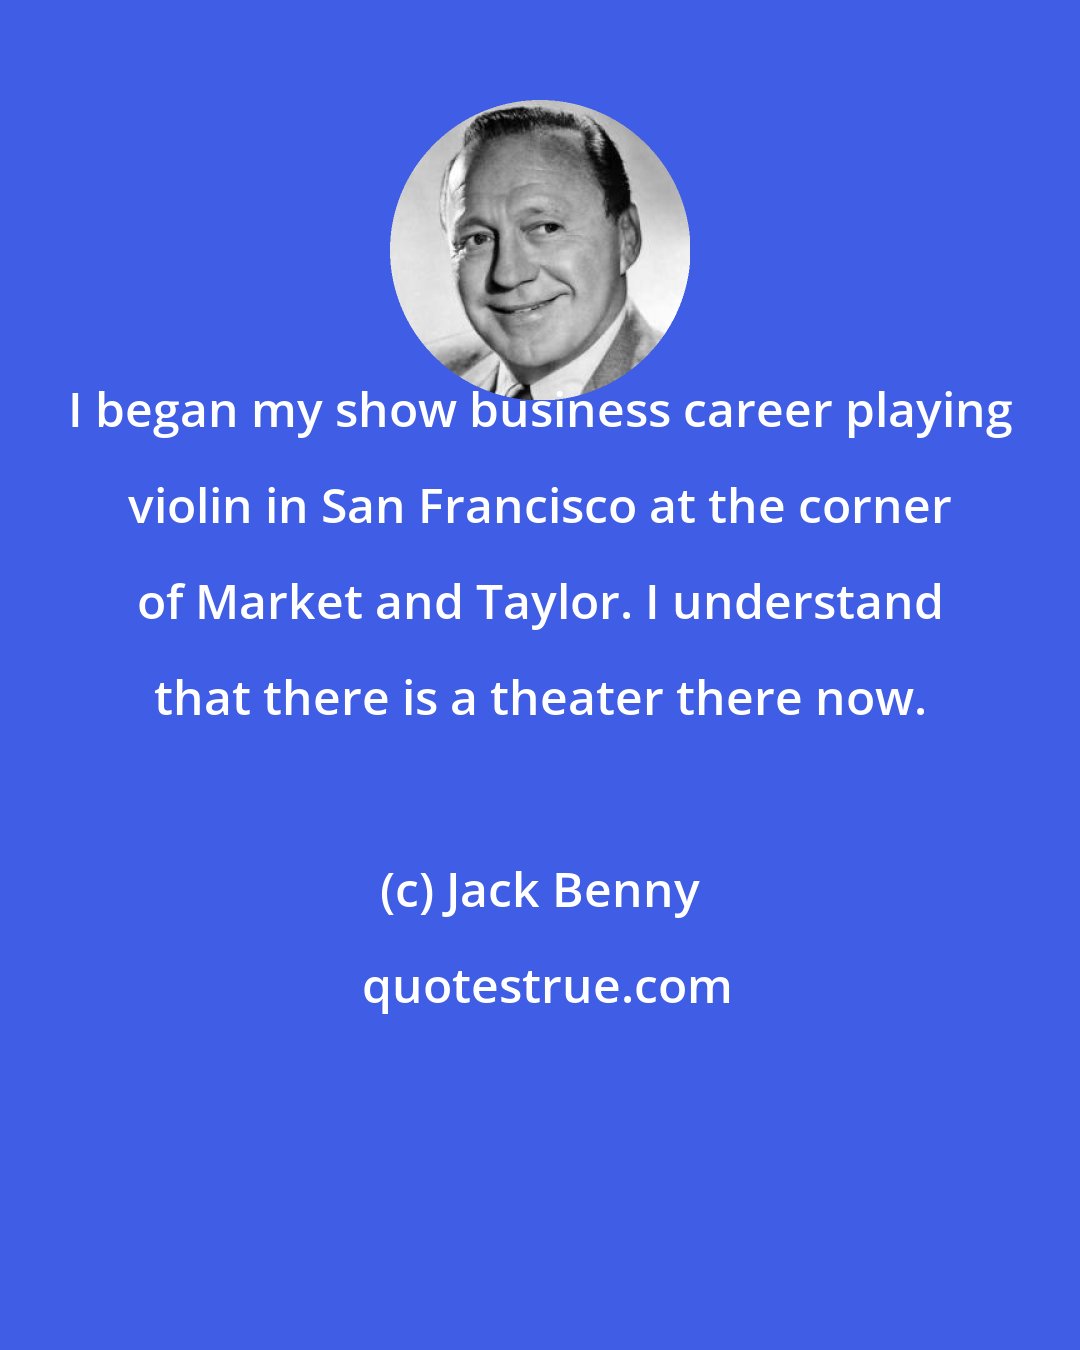 Jack Benny: I began my show business career playing violin in San Francisco at the corner of Market and Taylor. I understand that there is a theater there now.